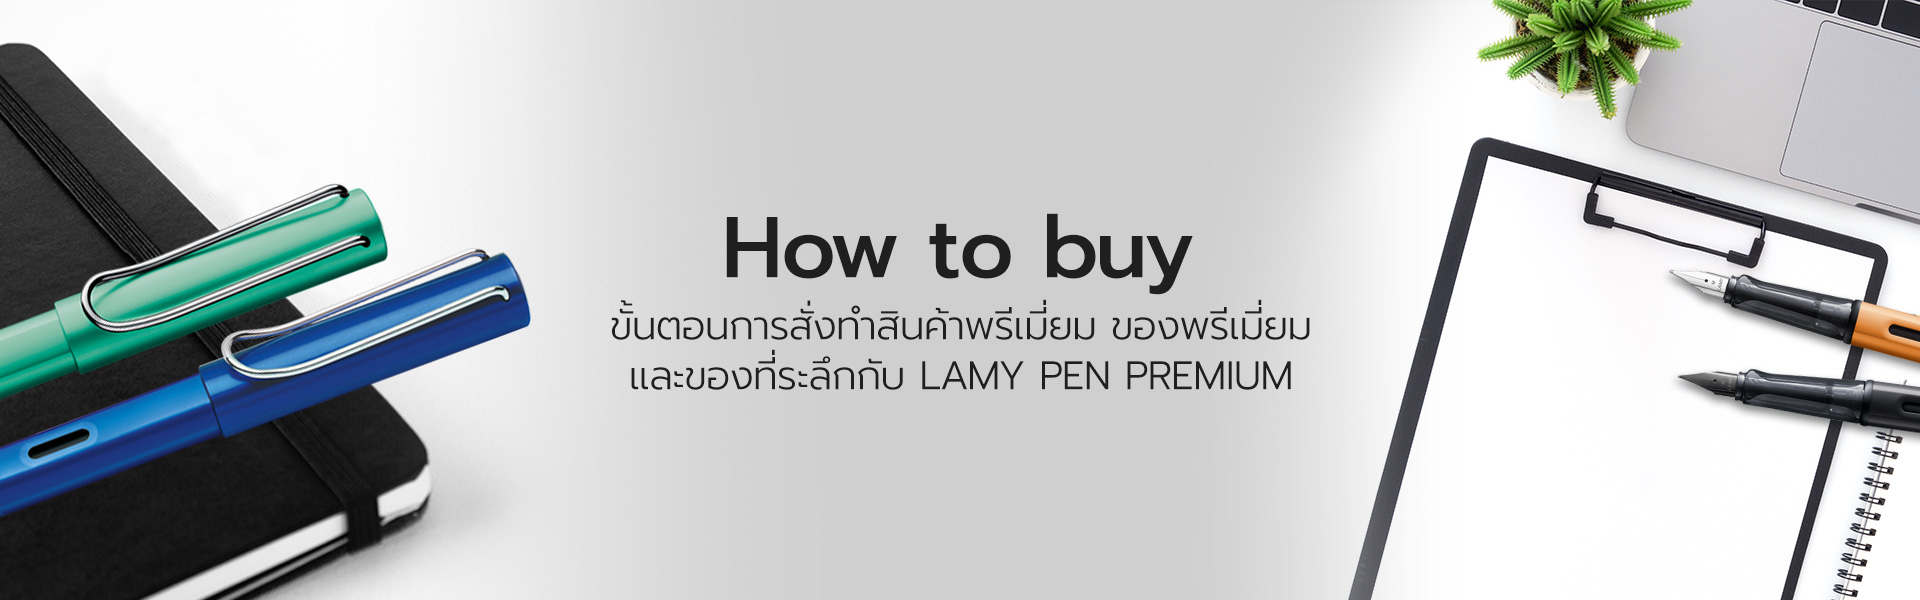 banner-how-to-buy